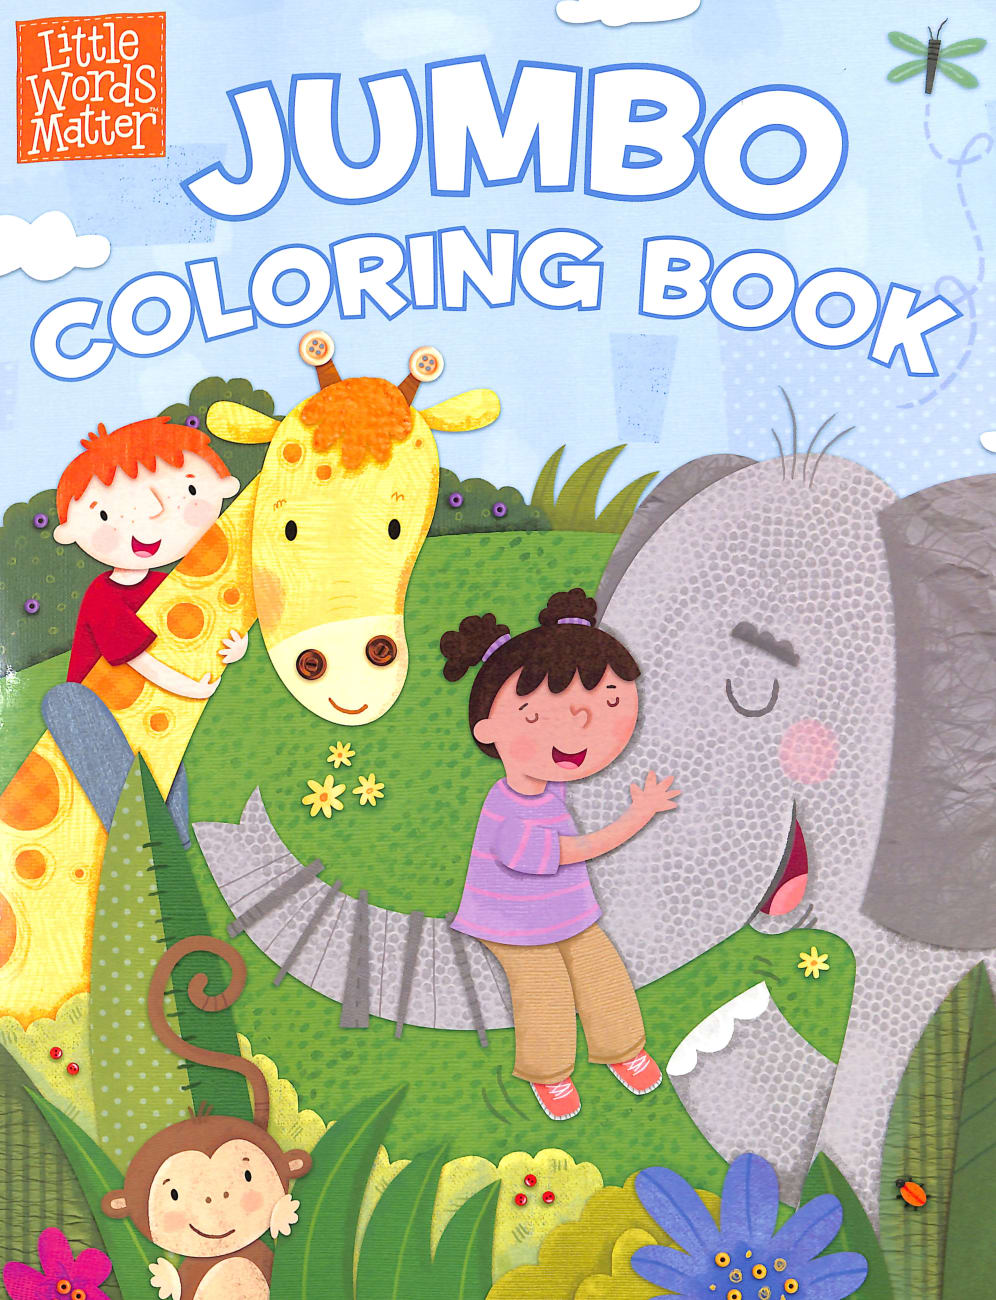 Little Words Matter Jumbo Coloring Book (Ages 1-4) Paperback